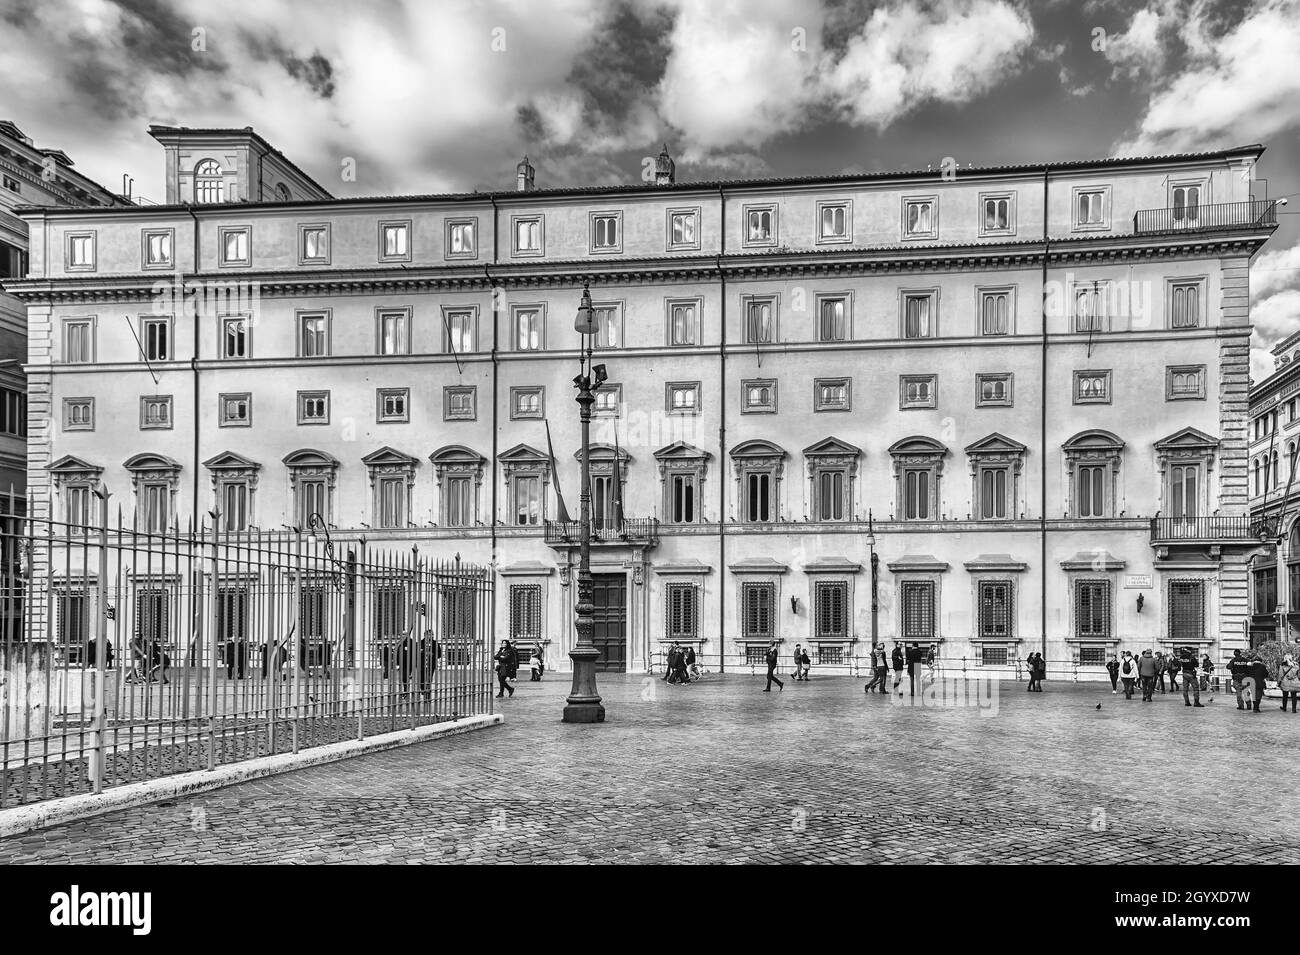 ROME - NOVEMBER 18: Facade of Palazzo Chigi, iconic building in central Rome, Italy, November 18, 2018. It is the official residence of the Prime Mini Stock Photo